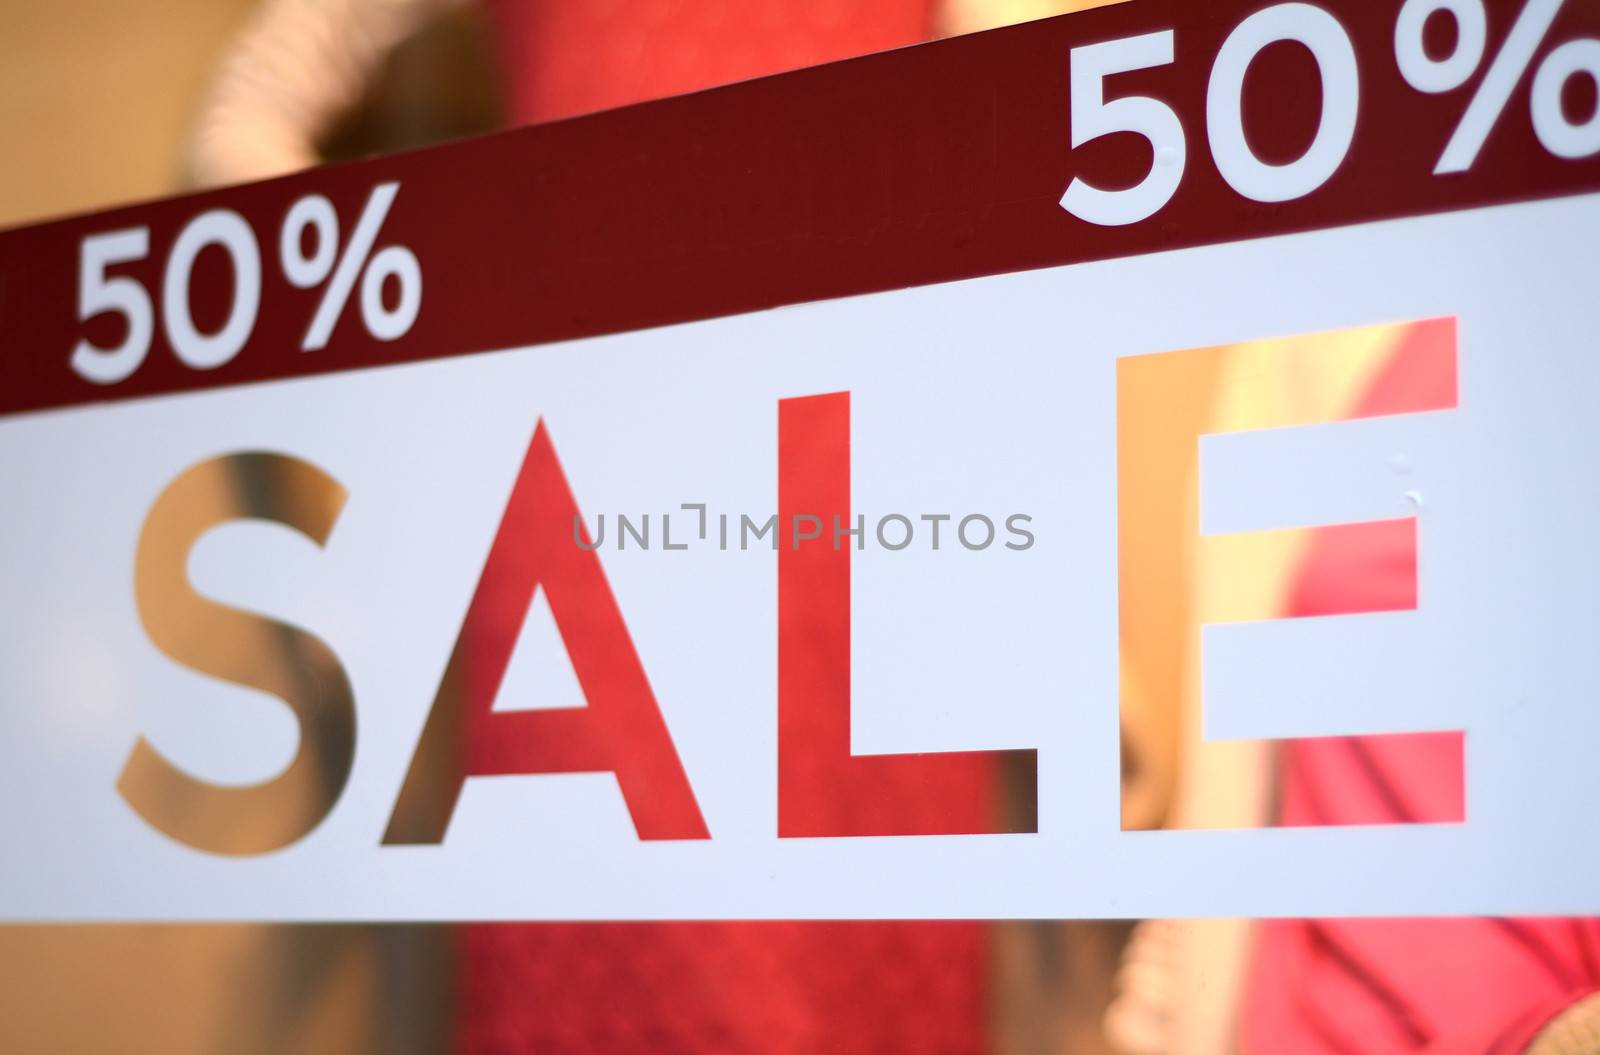 Retail Image Of A Sale Sign In A Clothing Store Window (With Shallow DoF)